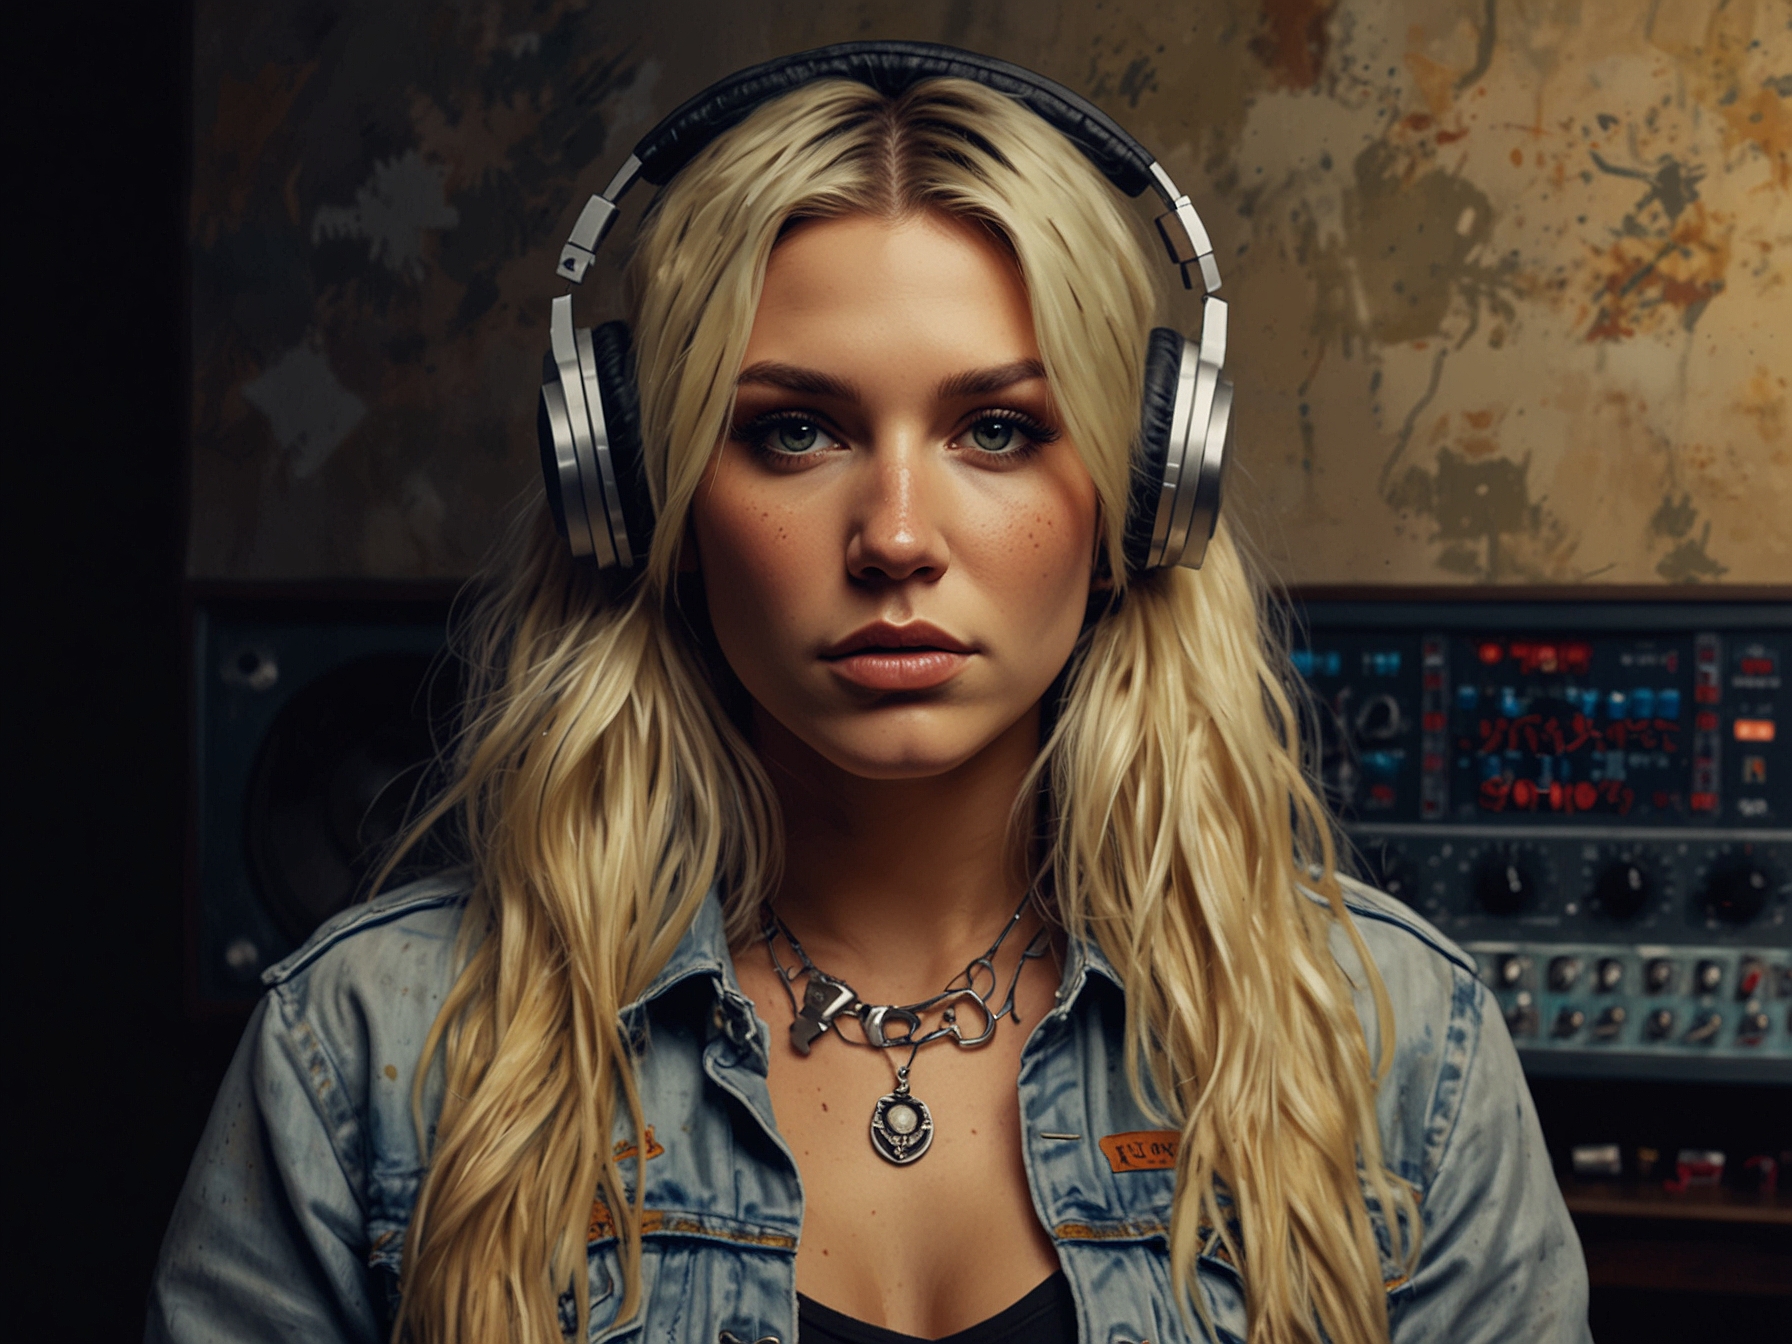 An image of Kesha standing in a recording studio, looking determined and focused as she holds headphones, symbolizing her triumphant return to music and creative independence.